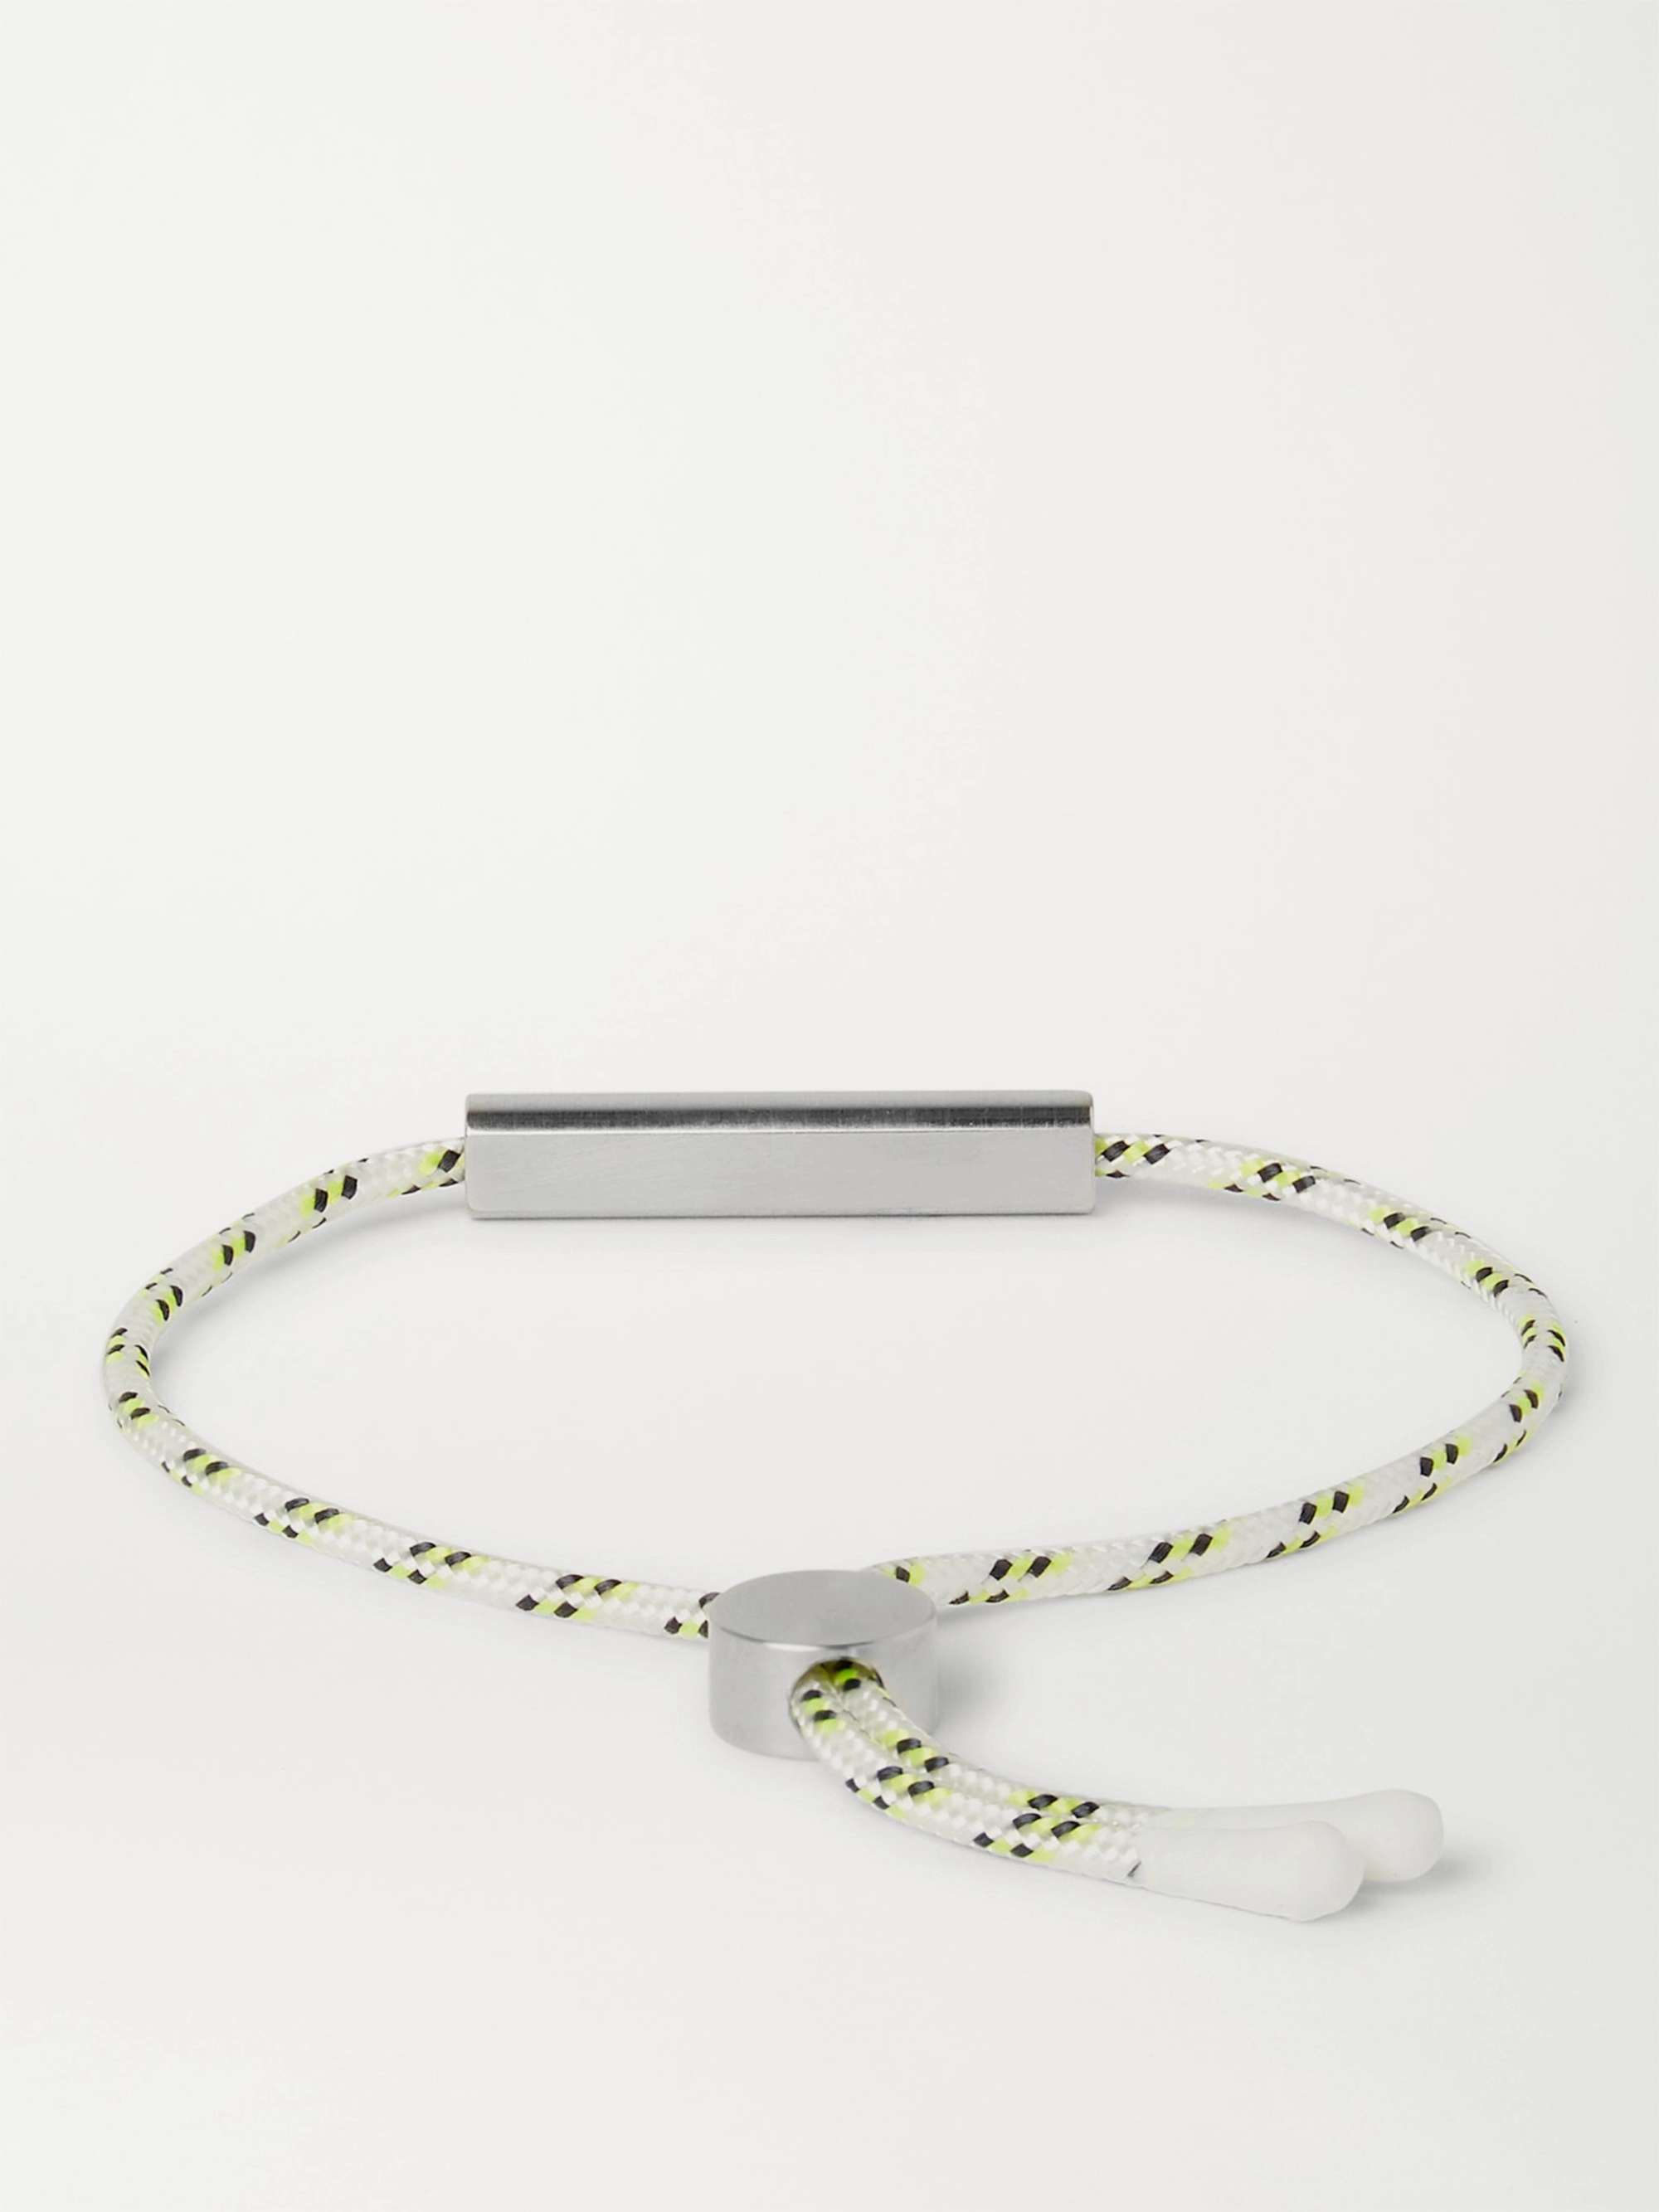 ALICE MADE THIS Charlie Striped Cord and Stainless Steel Bracelet